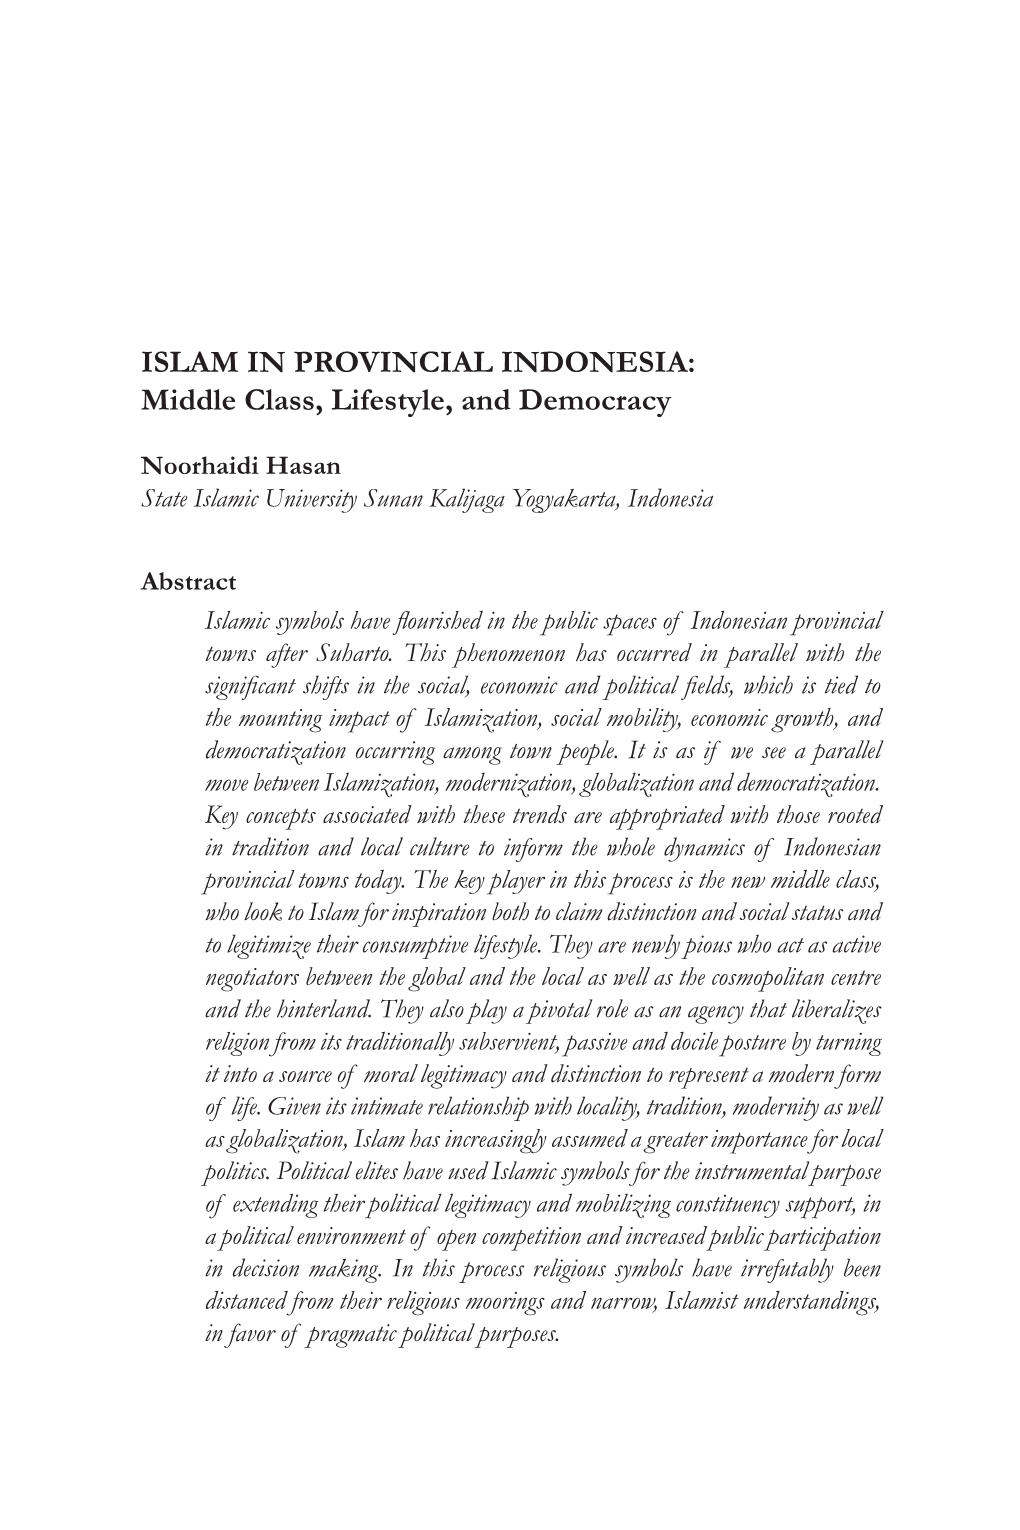 ISLAM in PROVINCIAL INDONESIA: Middle Class, Lifestyle, and Democracy